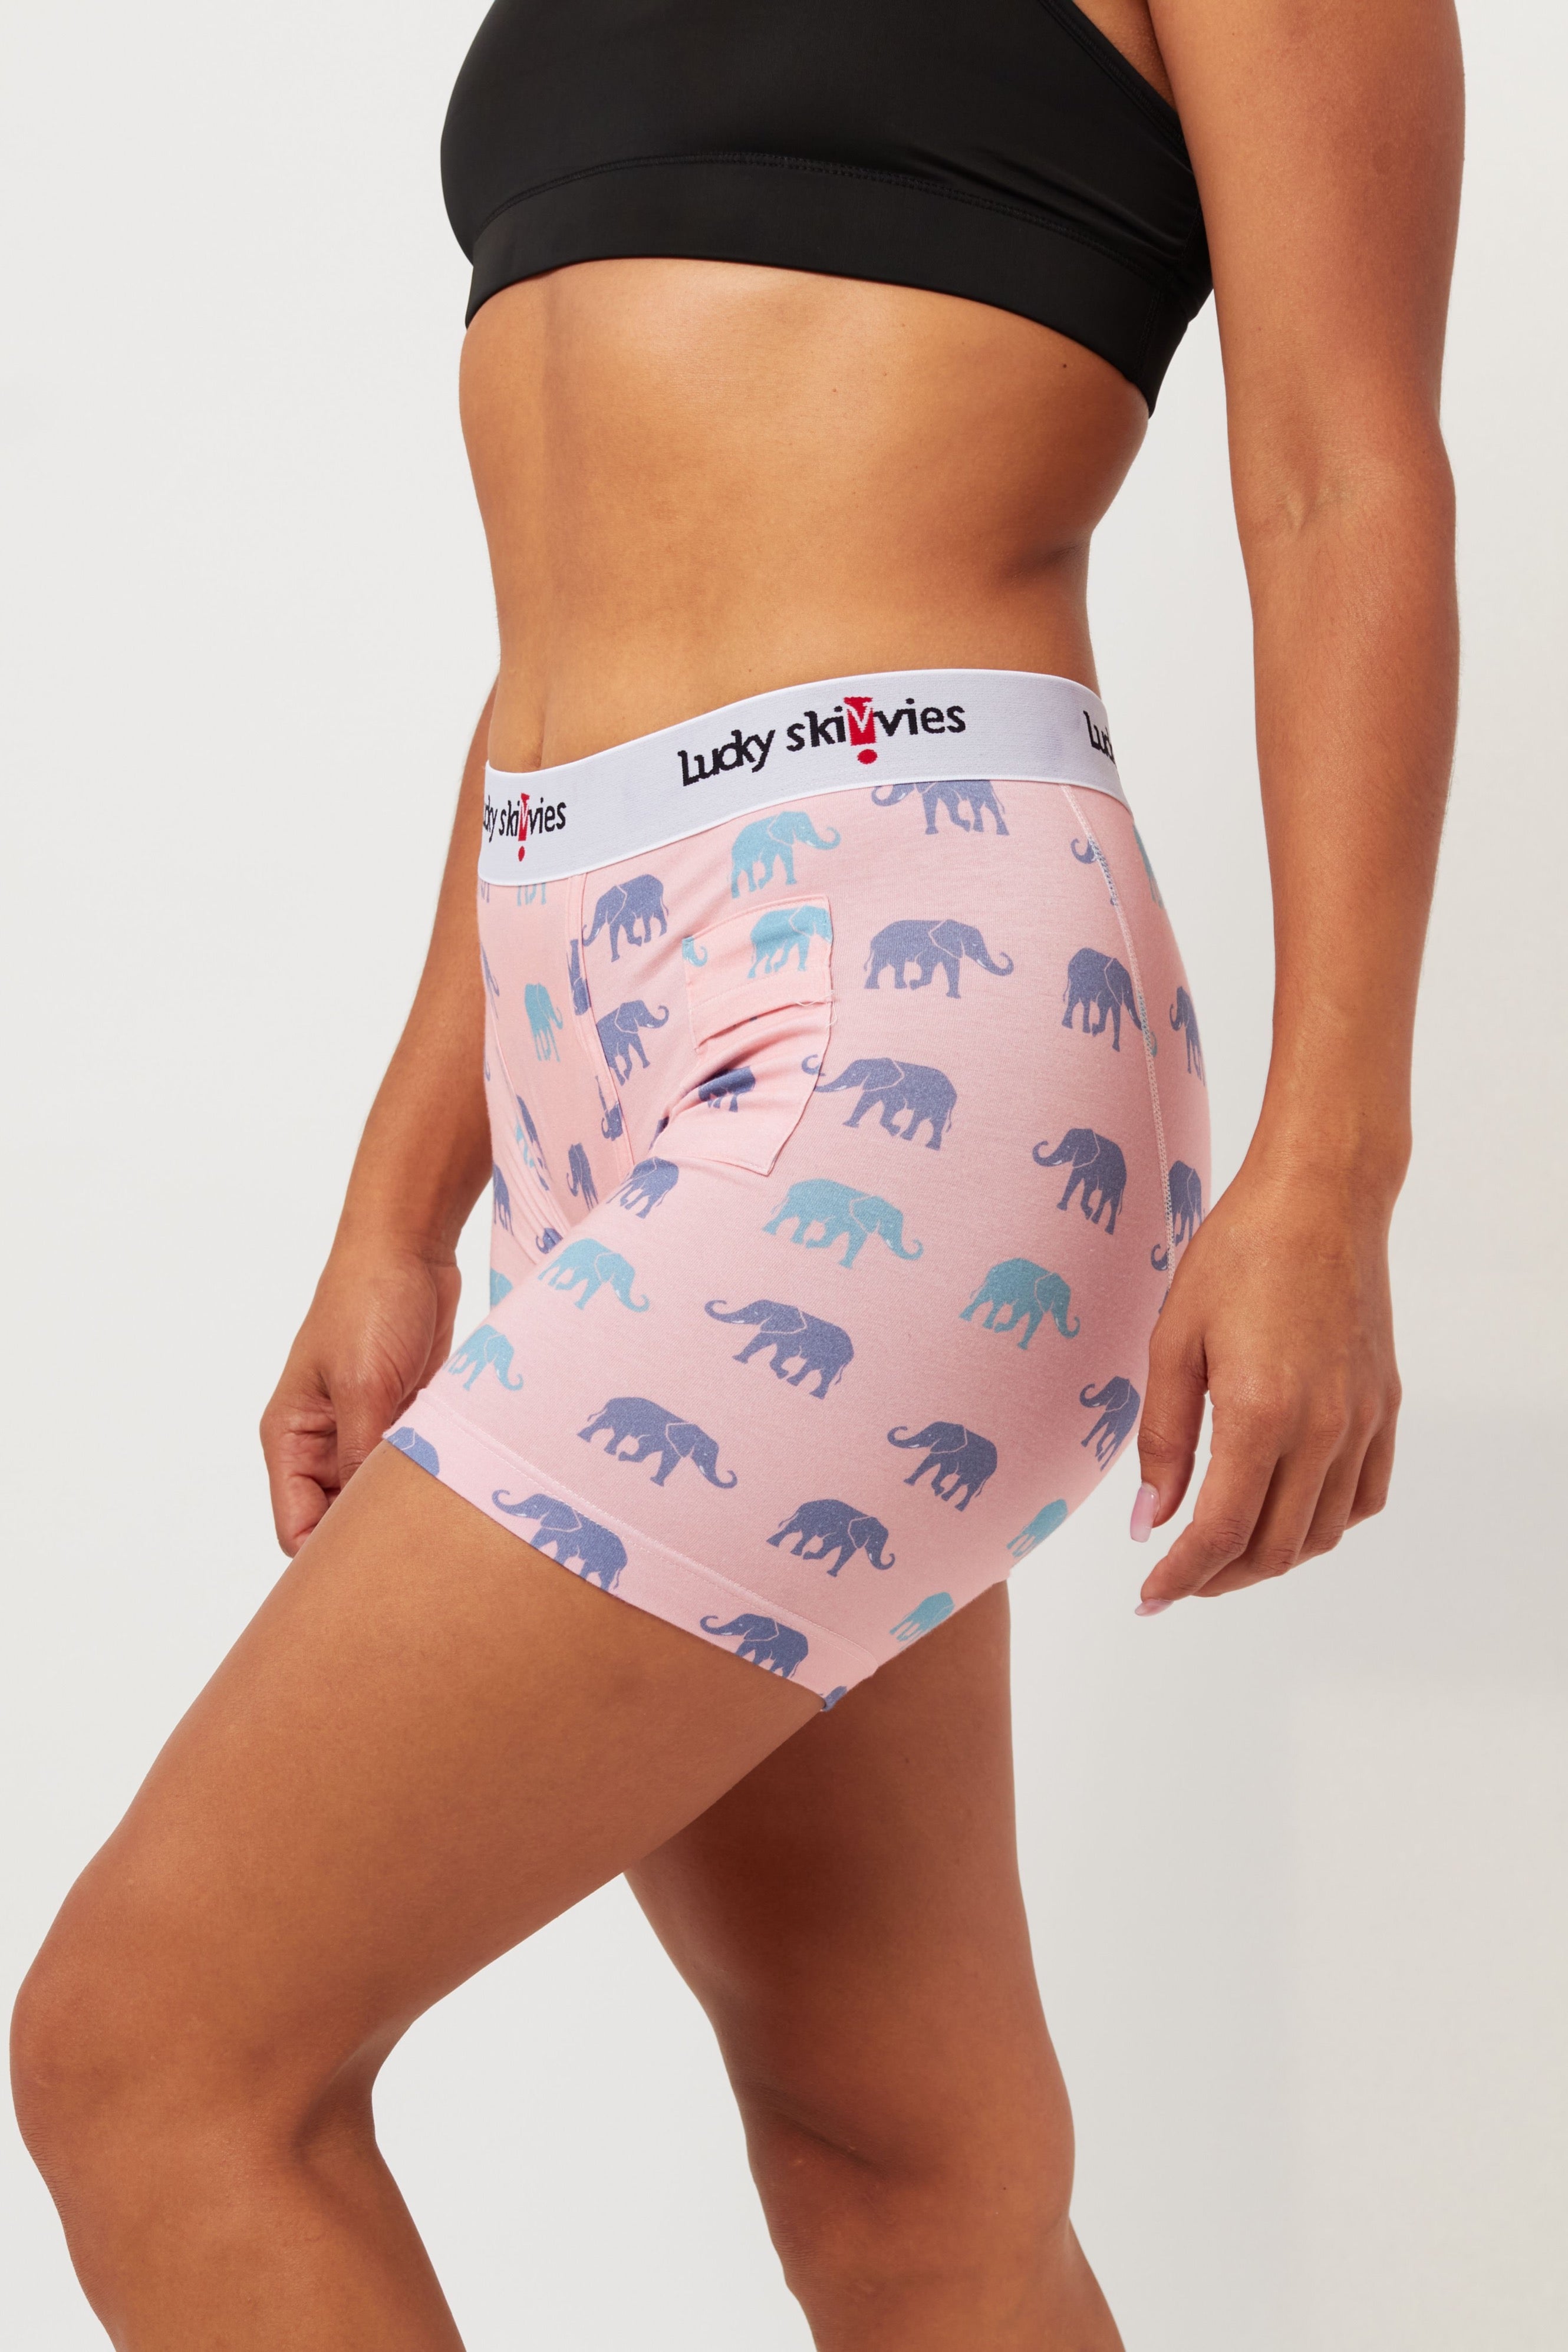 Checkered Smile Gender Neutral Boxer Briefs by Lucky Skivvies – Queer  Collective